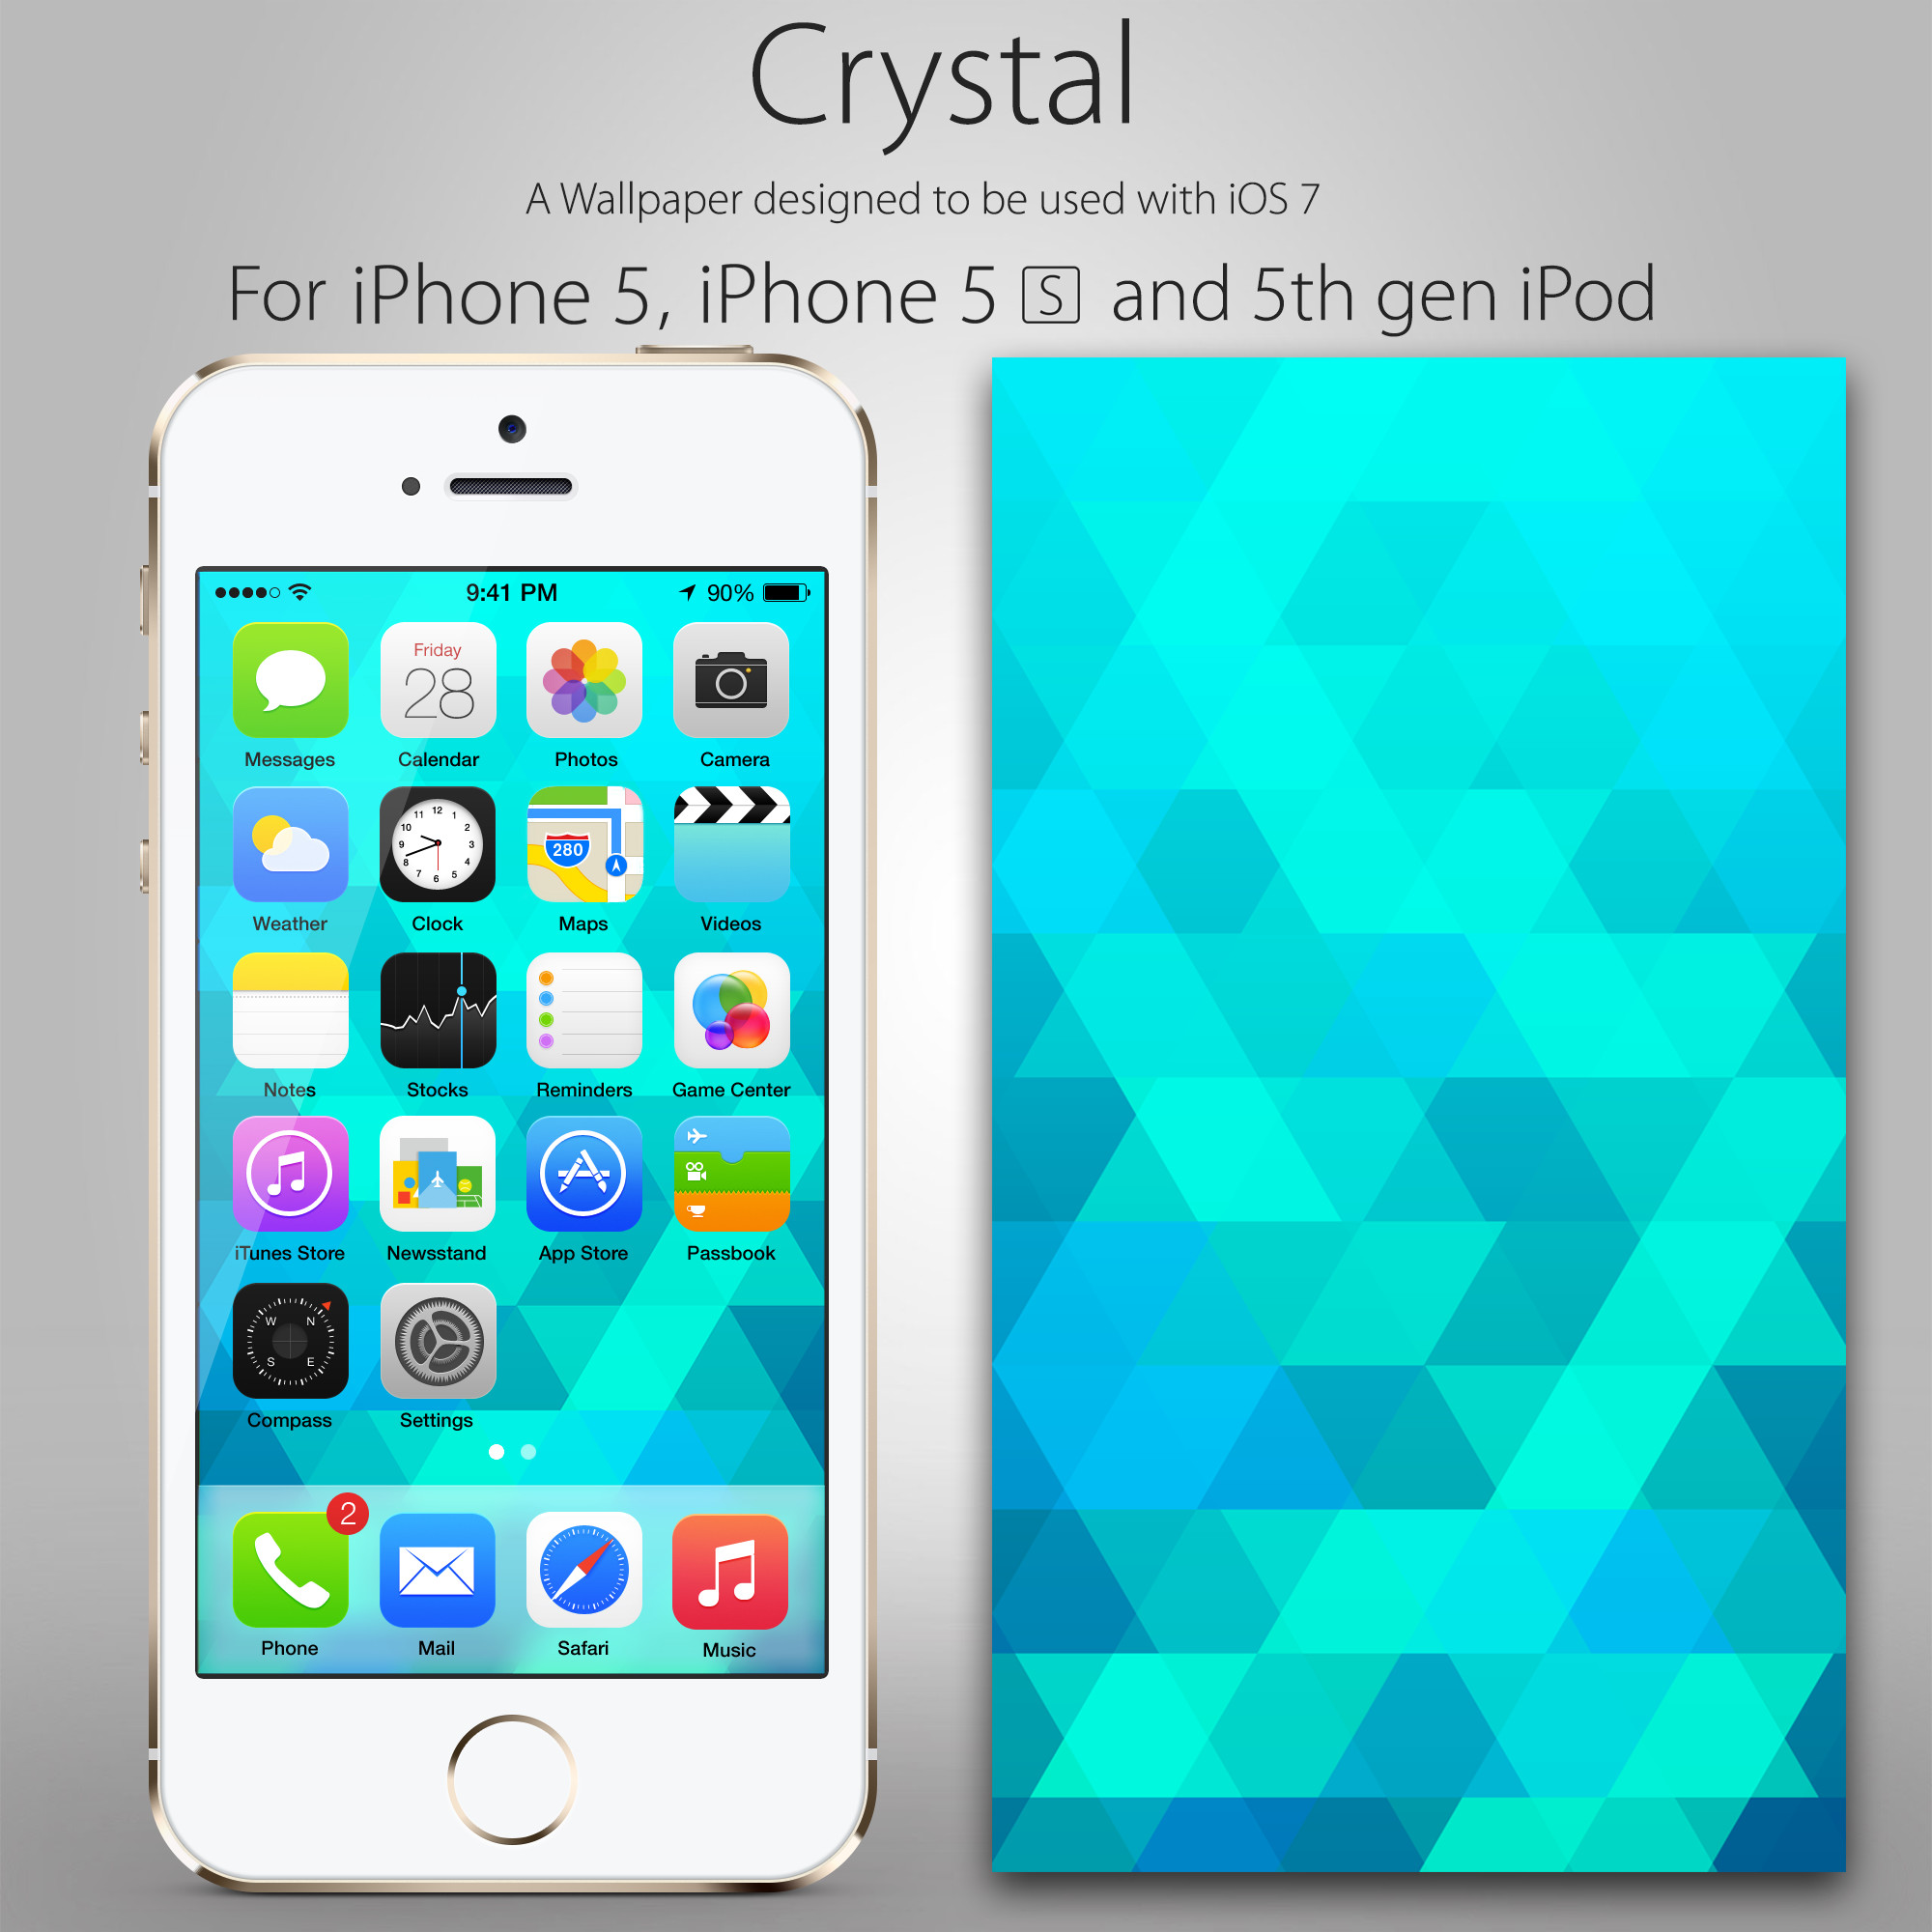 2000x2000 Crystal iPhone Wallpaper by VisualizationBrony Crystal iPhone Wallpaper by  VisualizationBrony